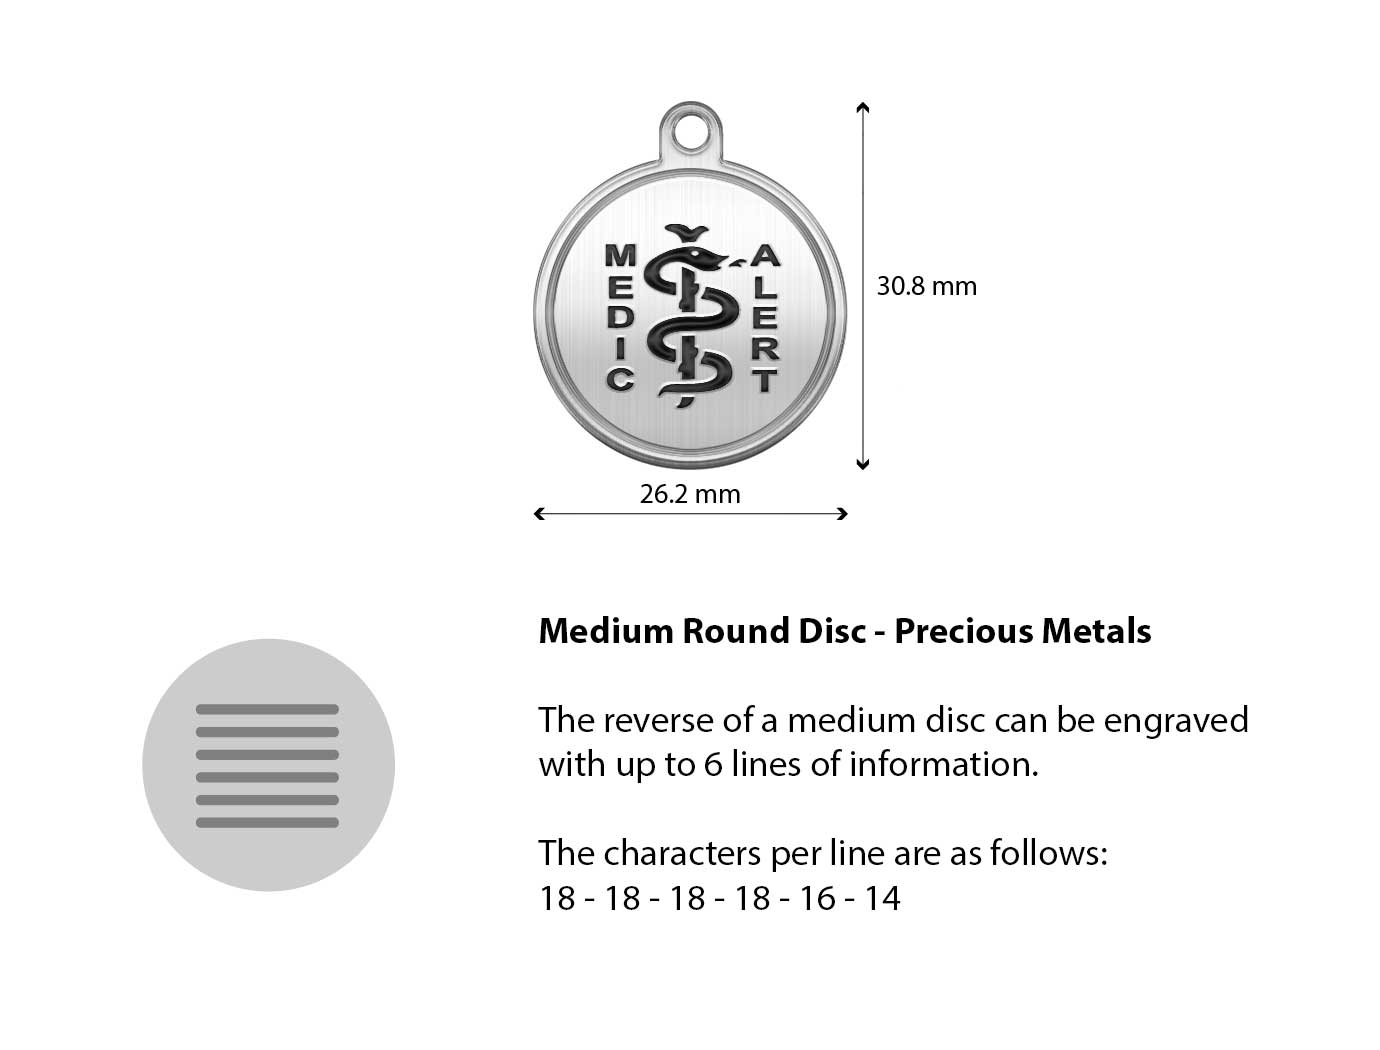 Diagram of the MedicAlert precious metal medium round disc with measurements and descriptions of the engraving specifications